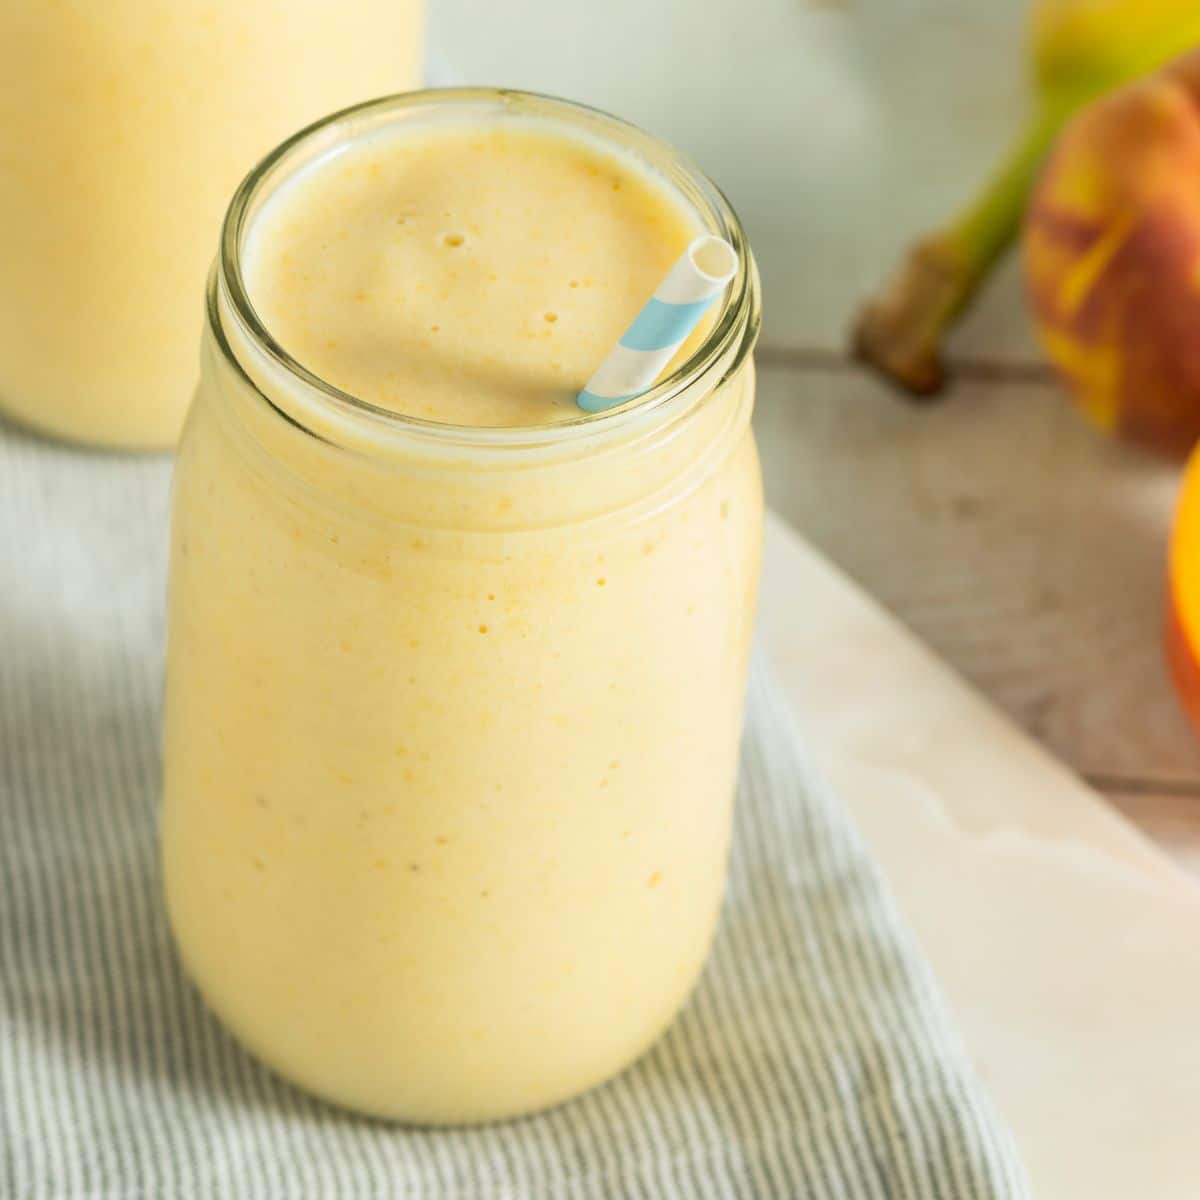 Pineapple peach smoothie in a glass cup